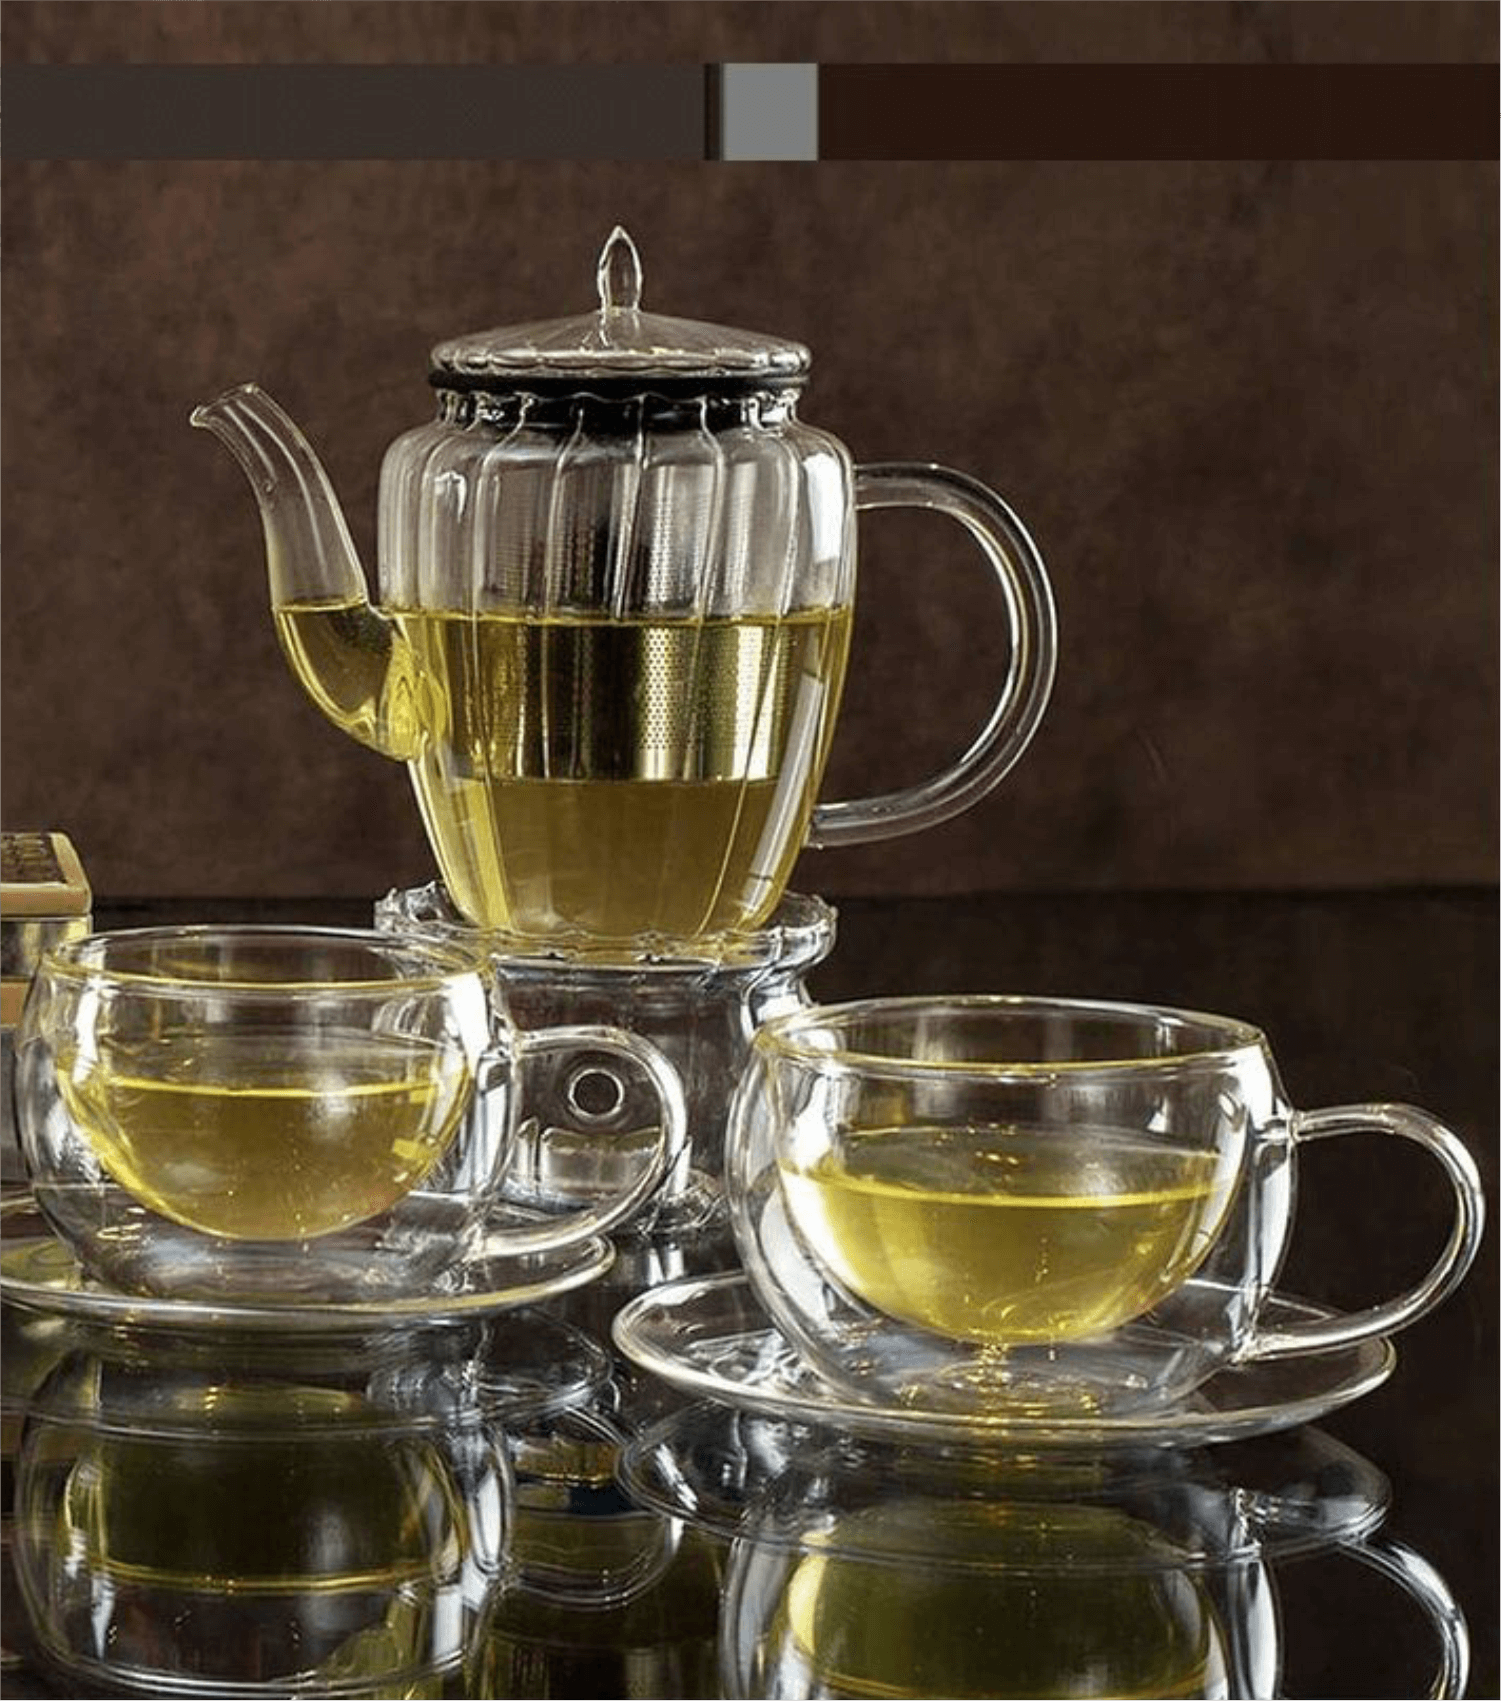 Double Walled Cup & Saucers Set of 4